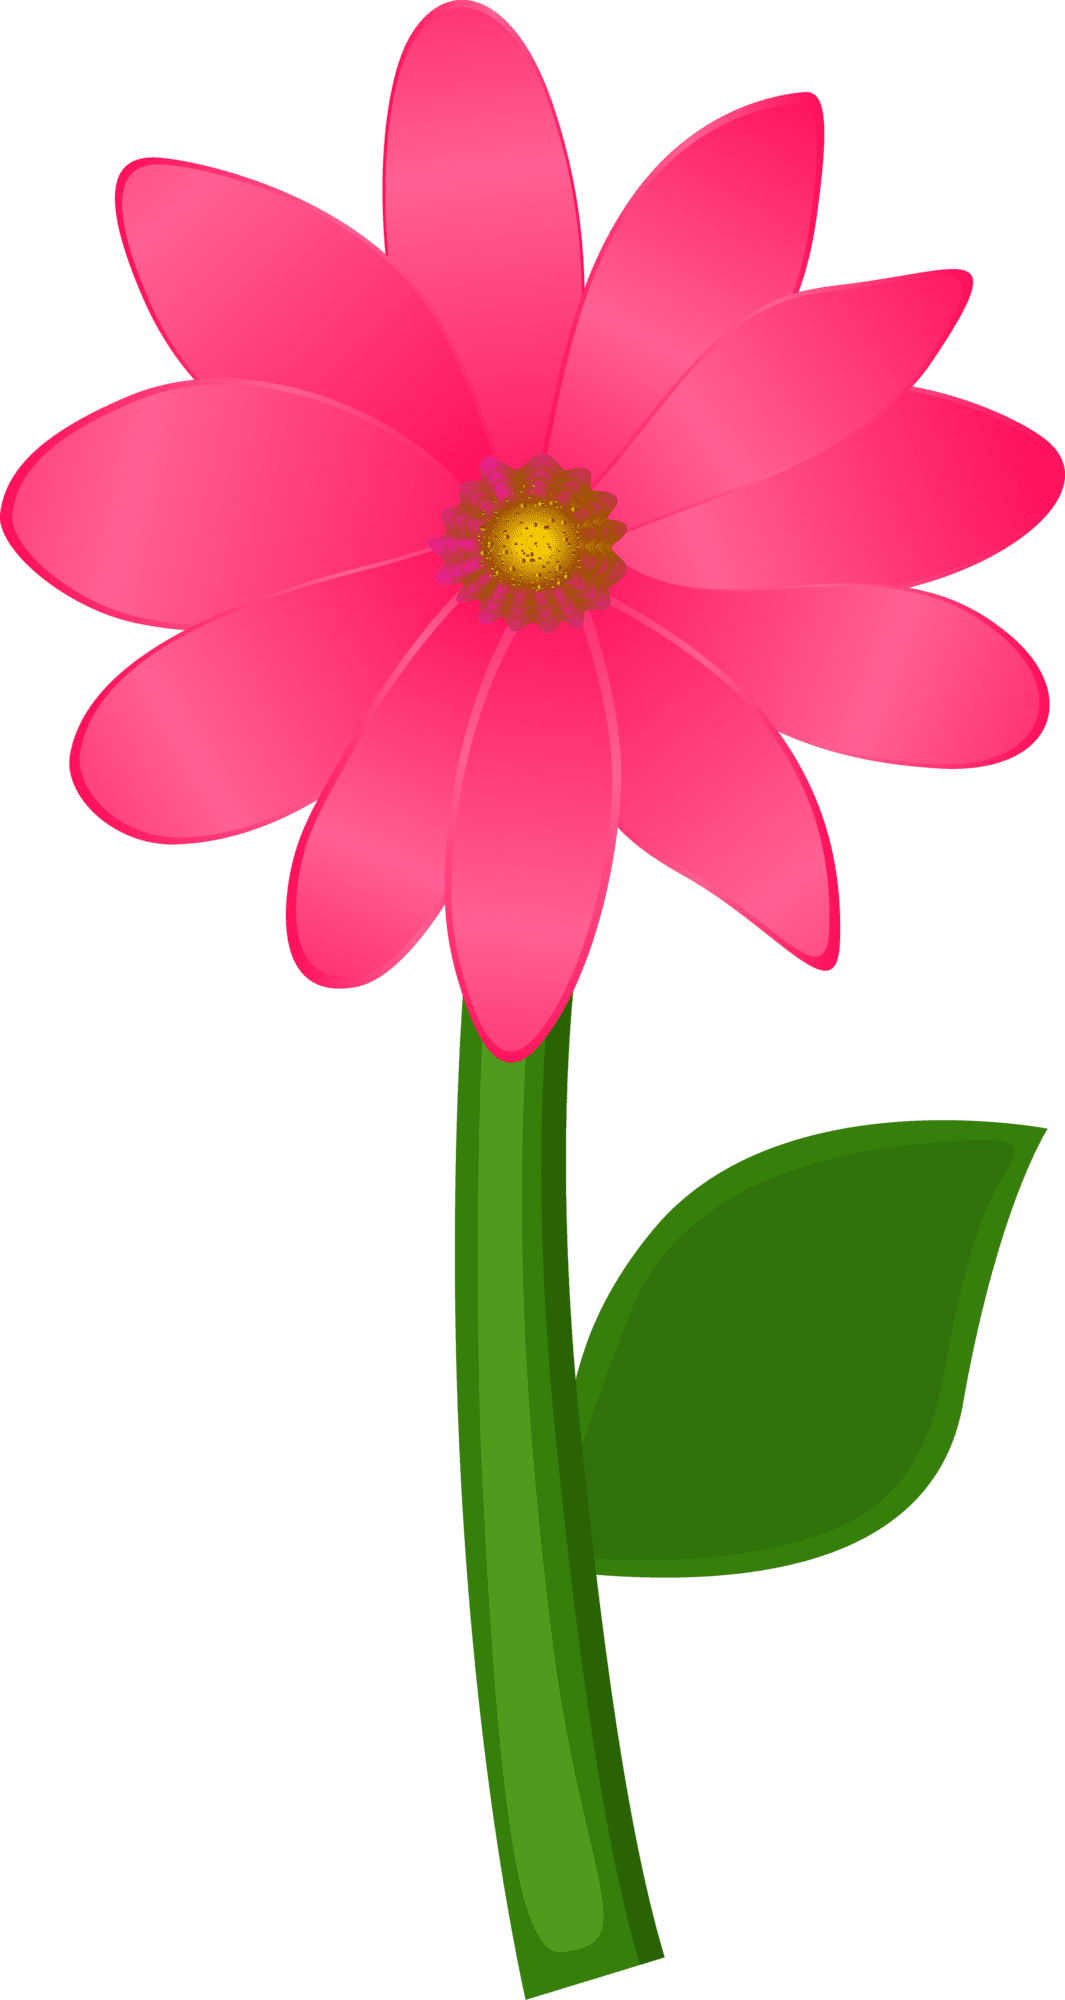 Pink flower daisy clipart picture